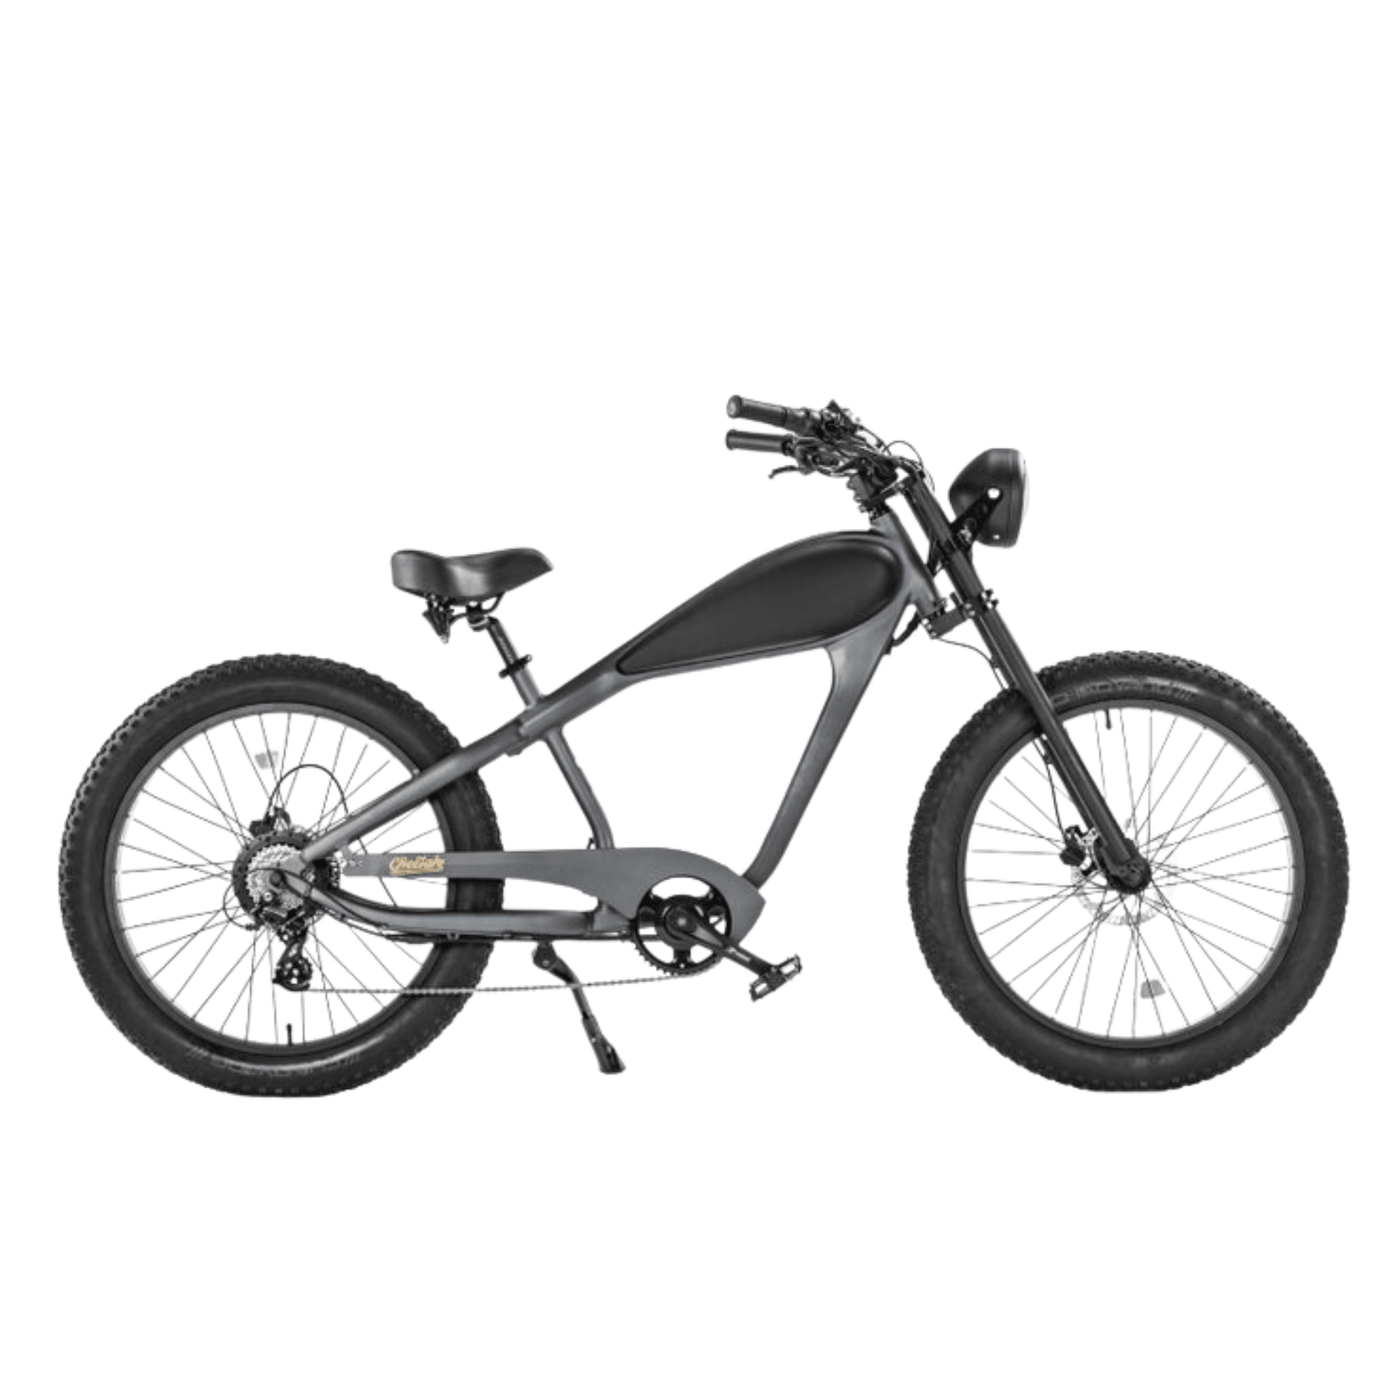 Revi Bikes Cheetah 750W Fat Tire Electric Bicycle - Rider Cycles 